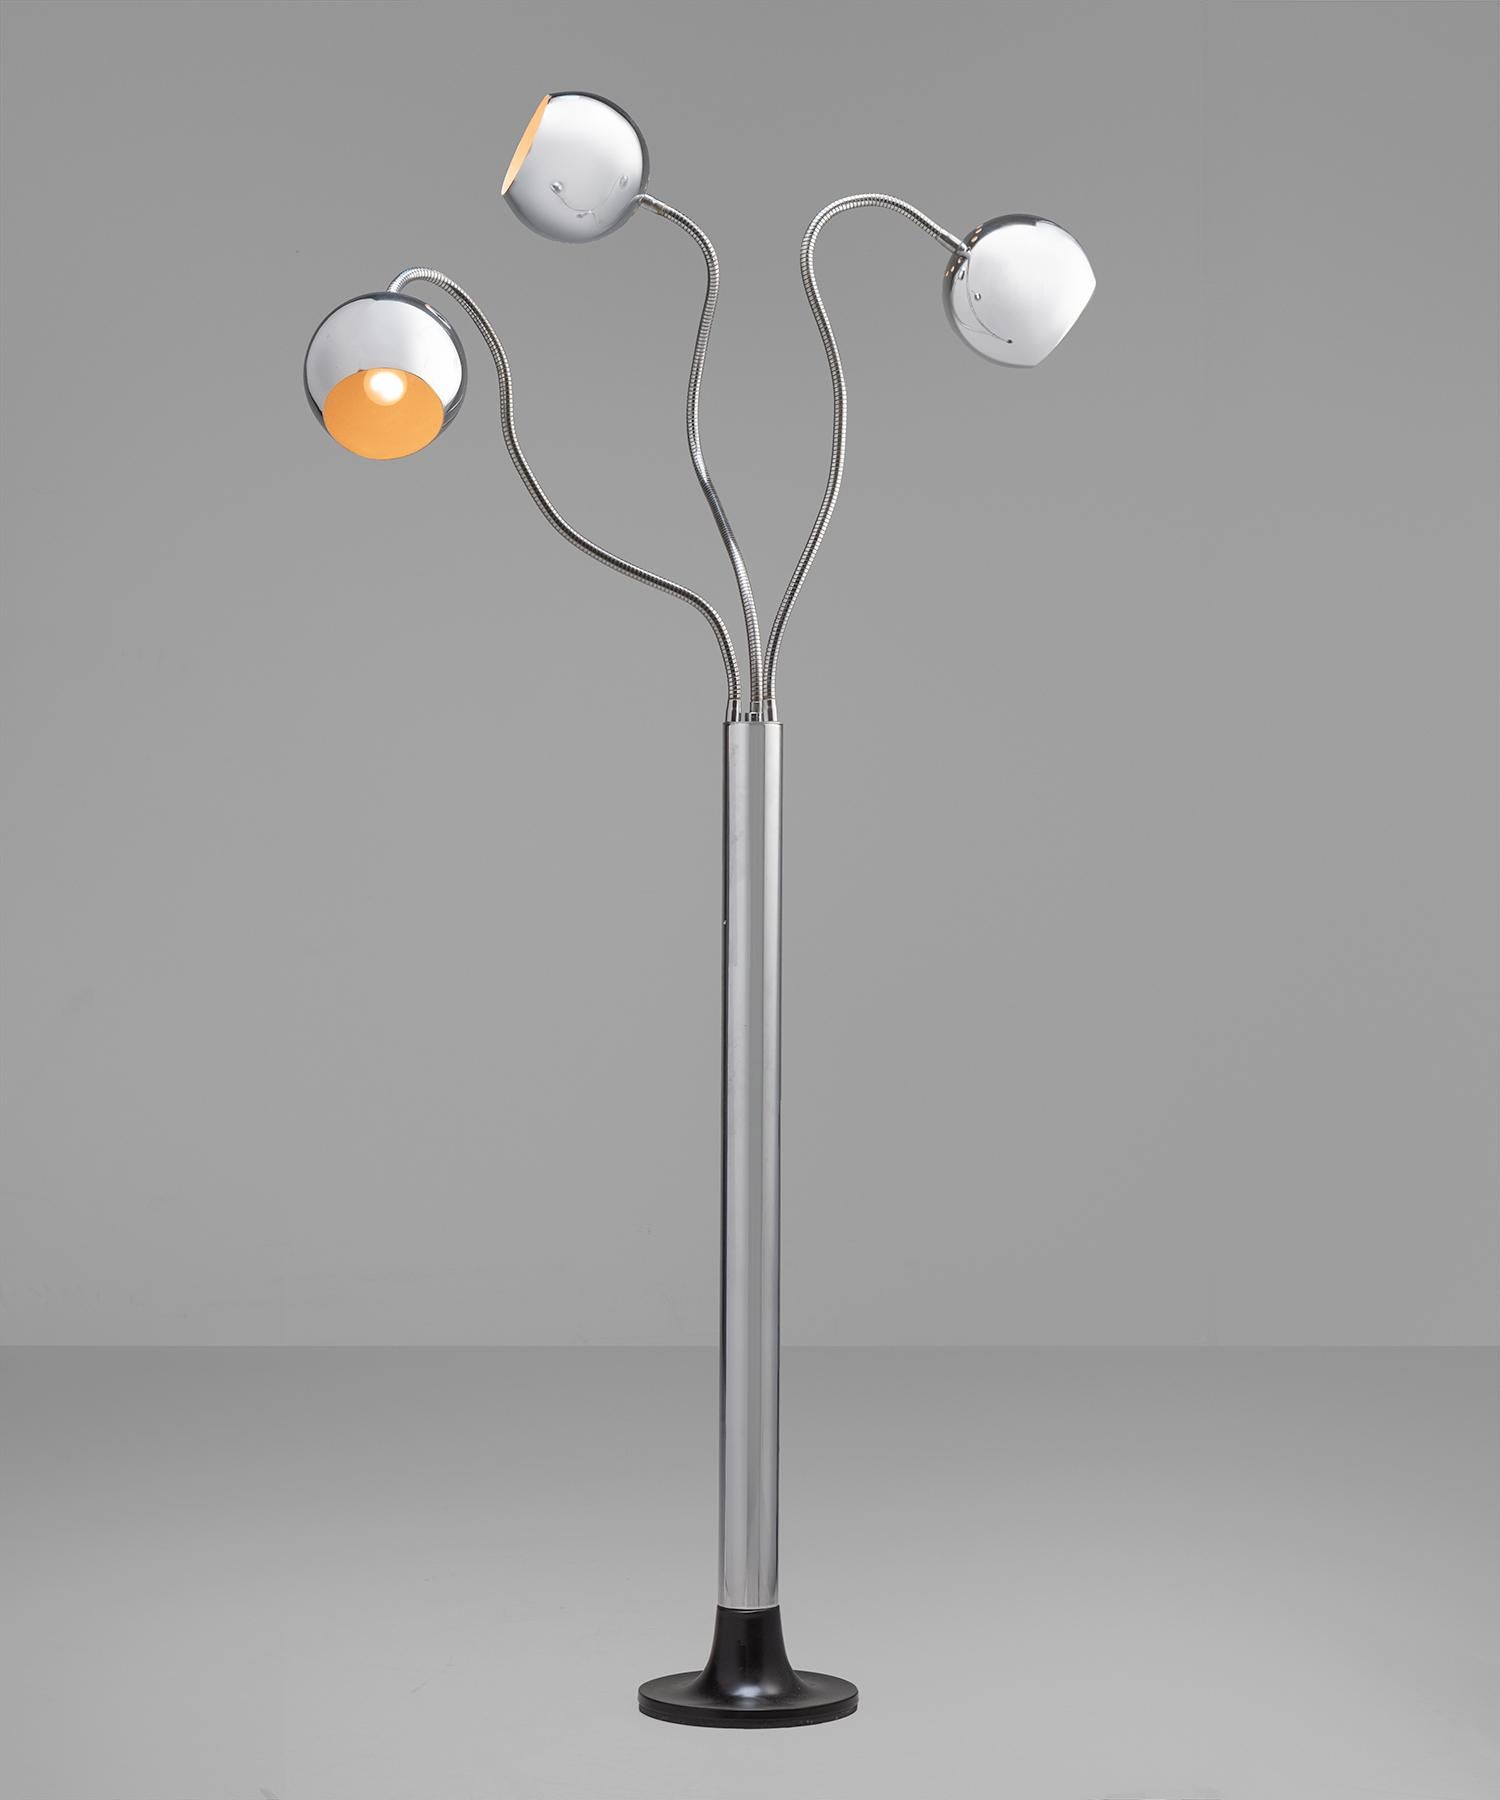 Chrome floor lamp by Goffredo Reggiani, Italy, circa 1970

Futuristic floor lamp with three articulating arms.